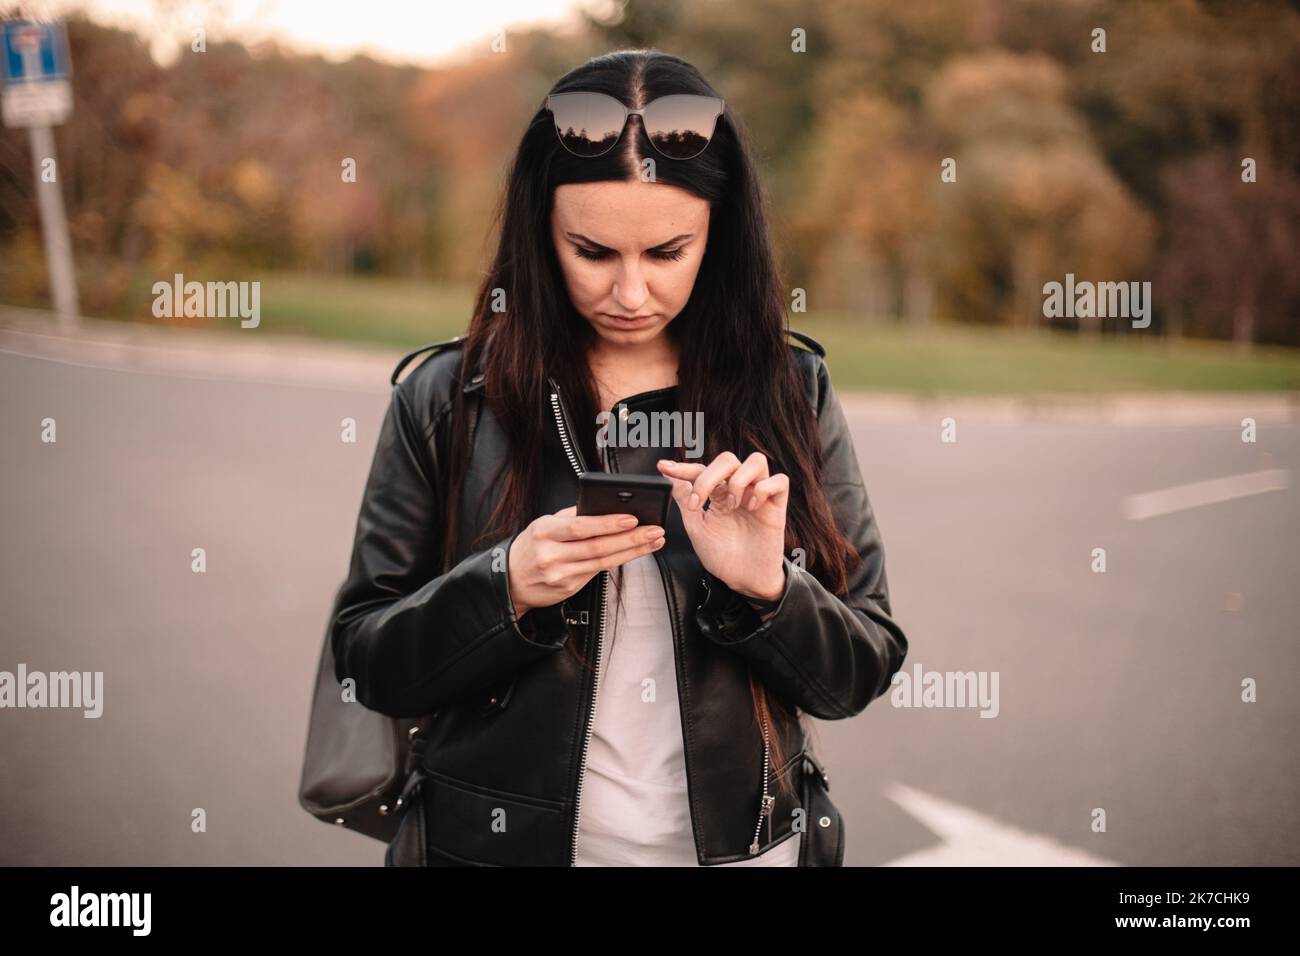 Serious young female traveler using smart phone while standing on the road making choice in what direction to go Stock Photo